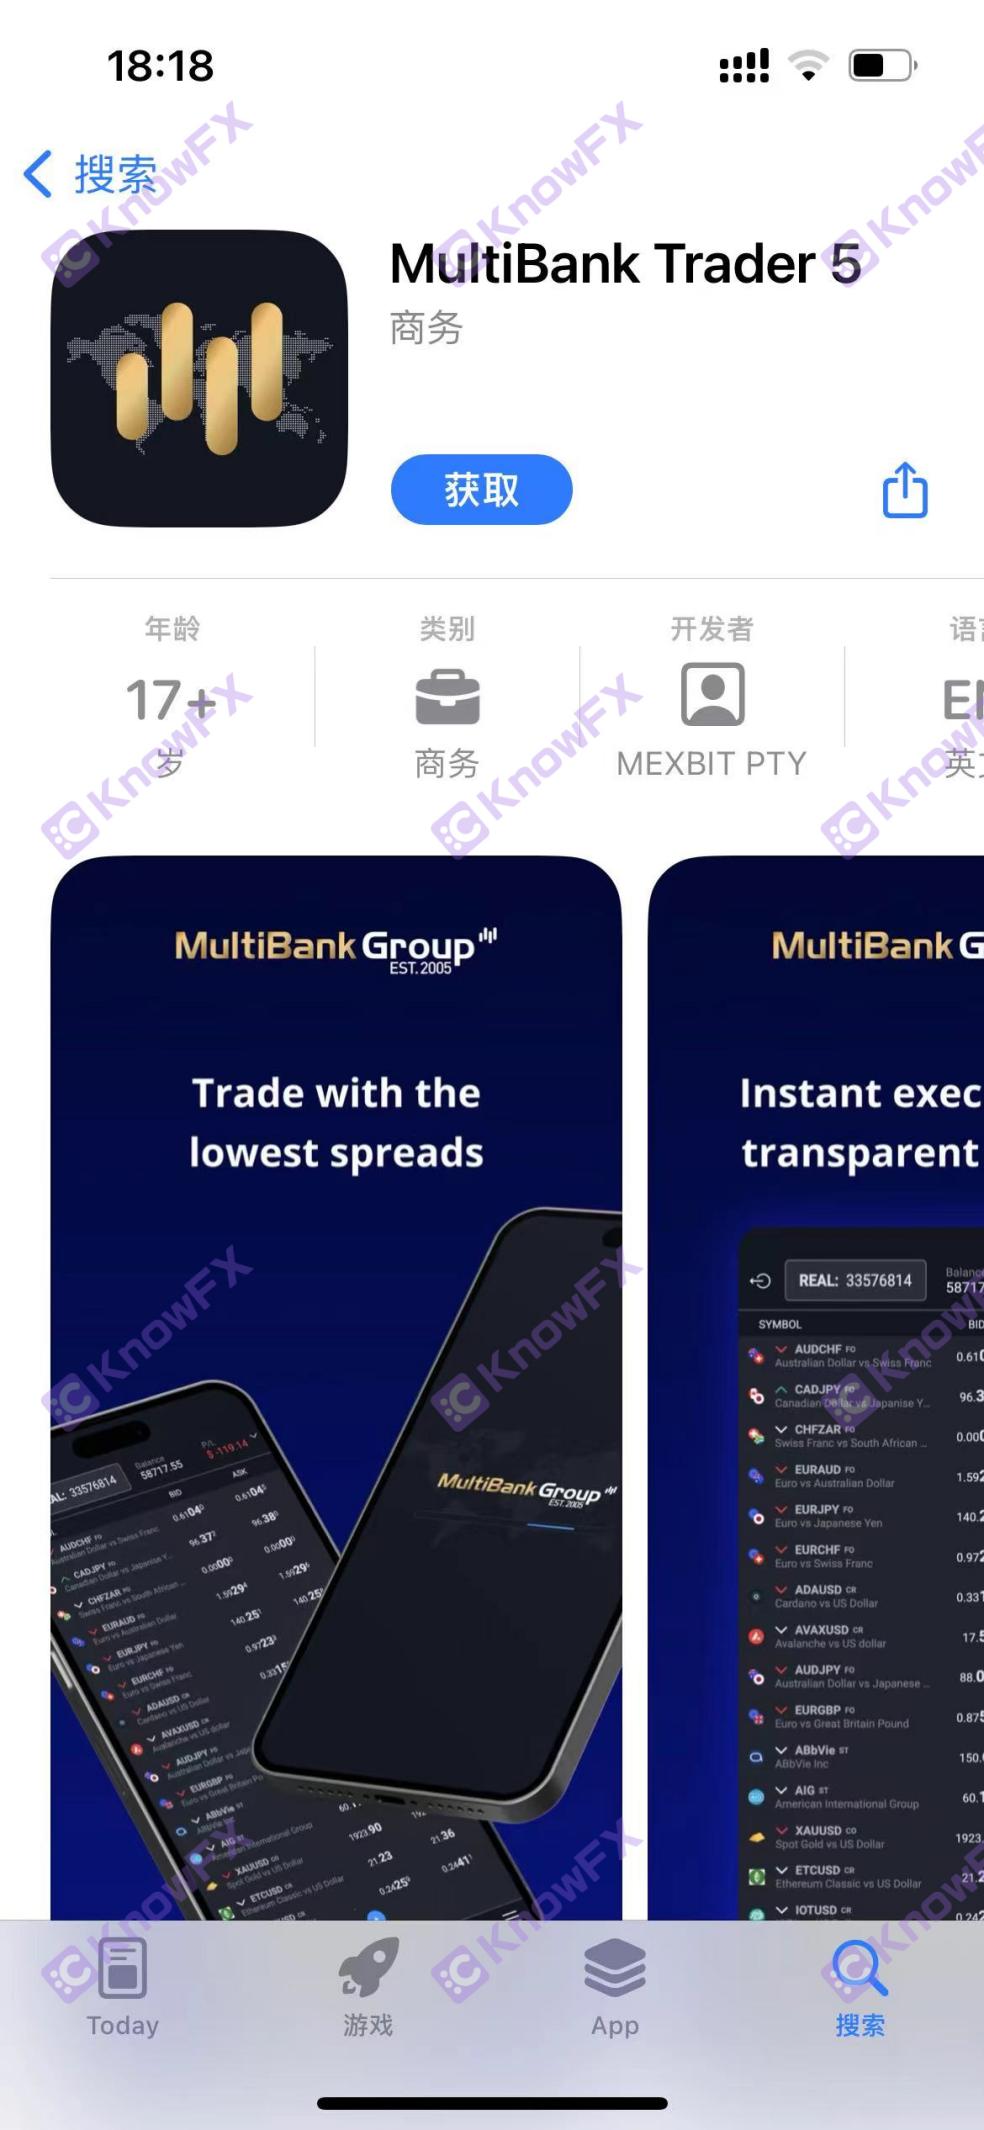 Forex securities firms Multibank Group Datong Financial Group uses a registered company to pretend to be a foreign exchange transaction!Self -developed app dipped in MT4, 5-第15张图片-要懂汇圈网